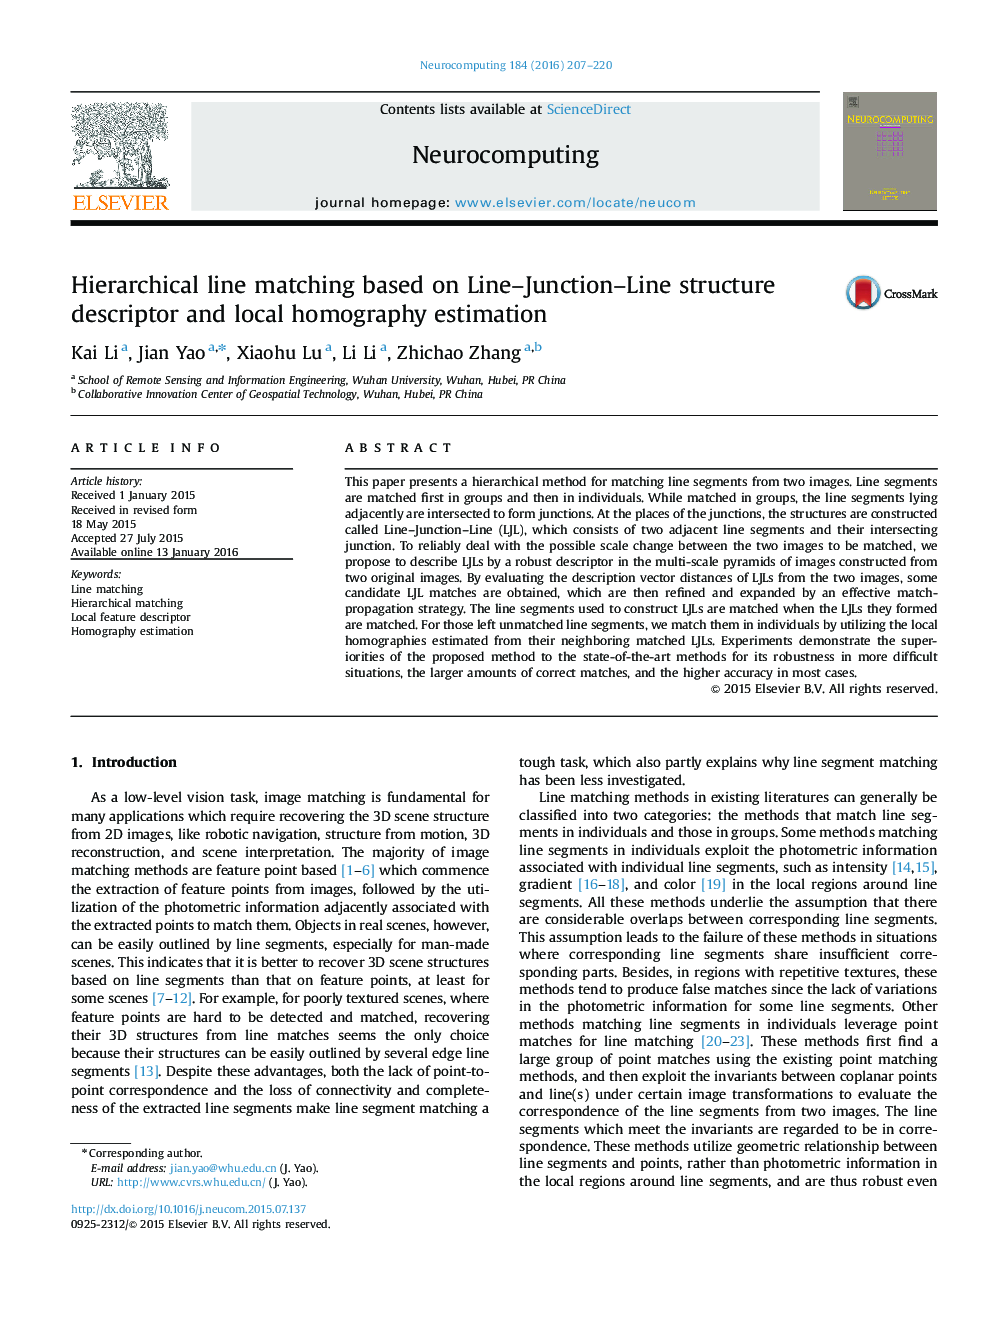 Hierarchical line matching based on Line–Junction–Line structure descriptor and local homography estimation